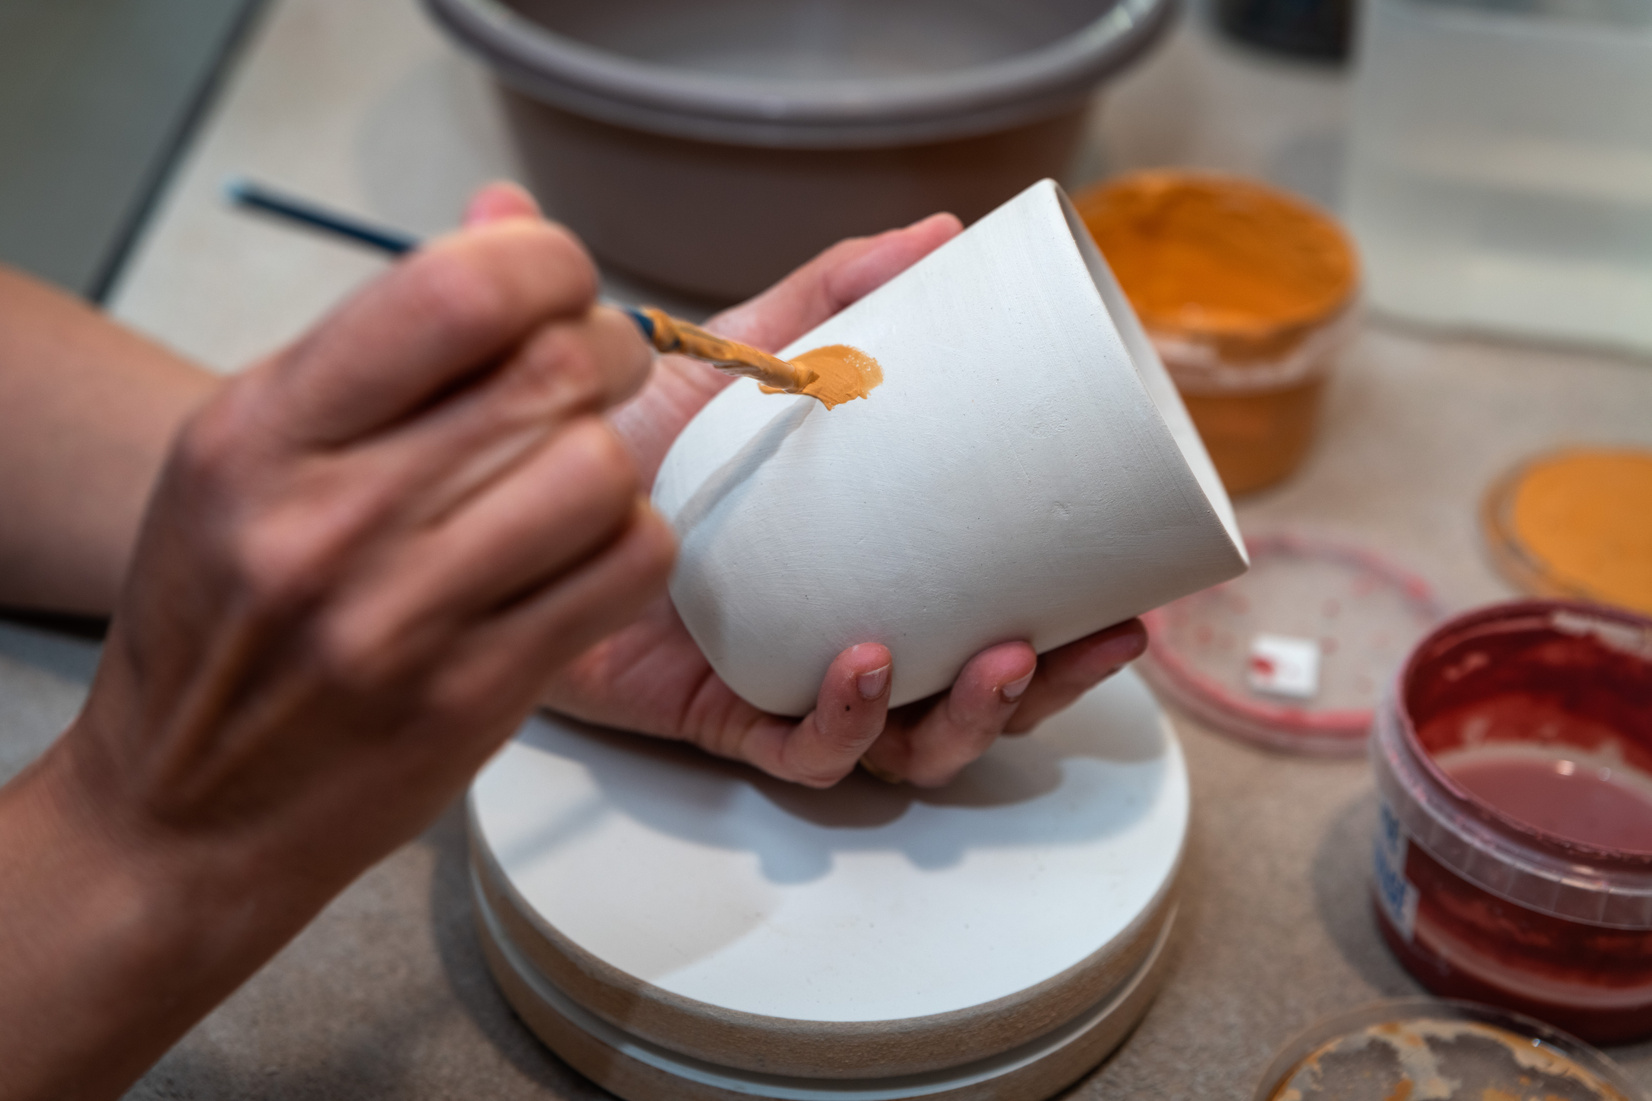 Pottery. Painting pottery.